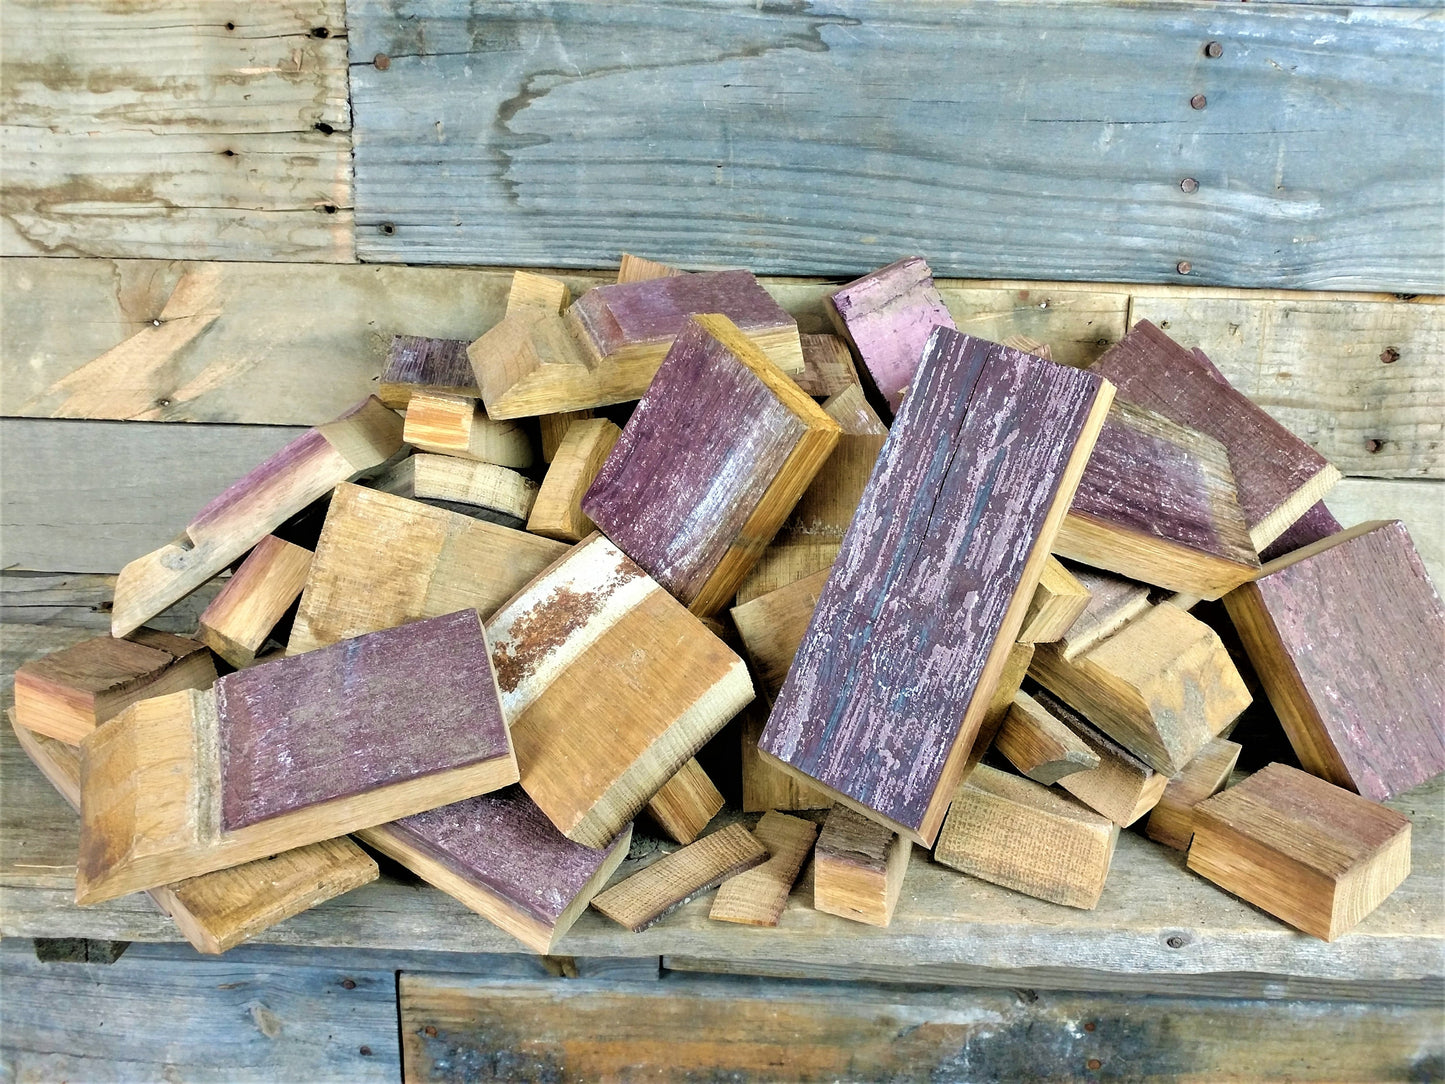 BBQ Sale! Wine Barrel pieces for grilling made from retired wine barrels 100% Recycled!